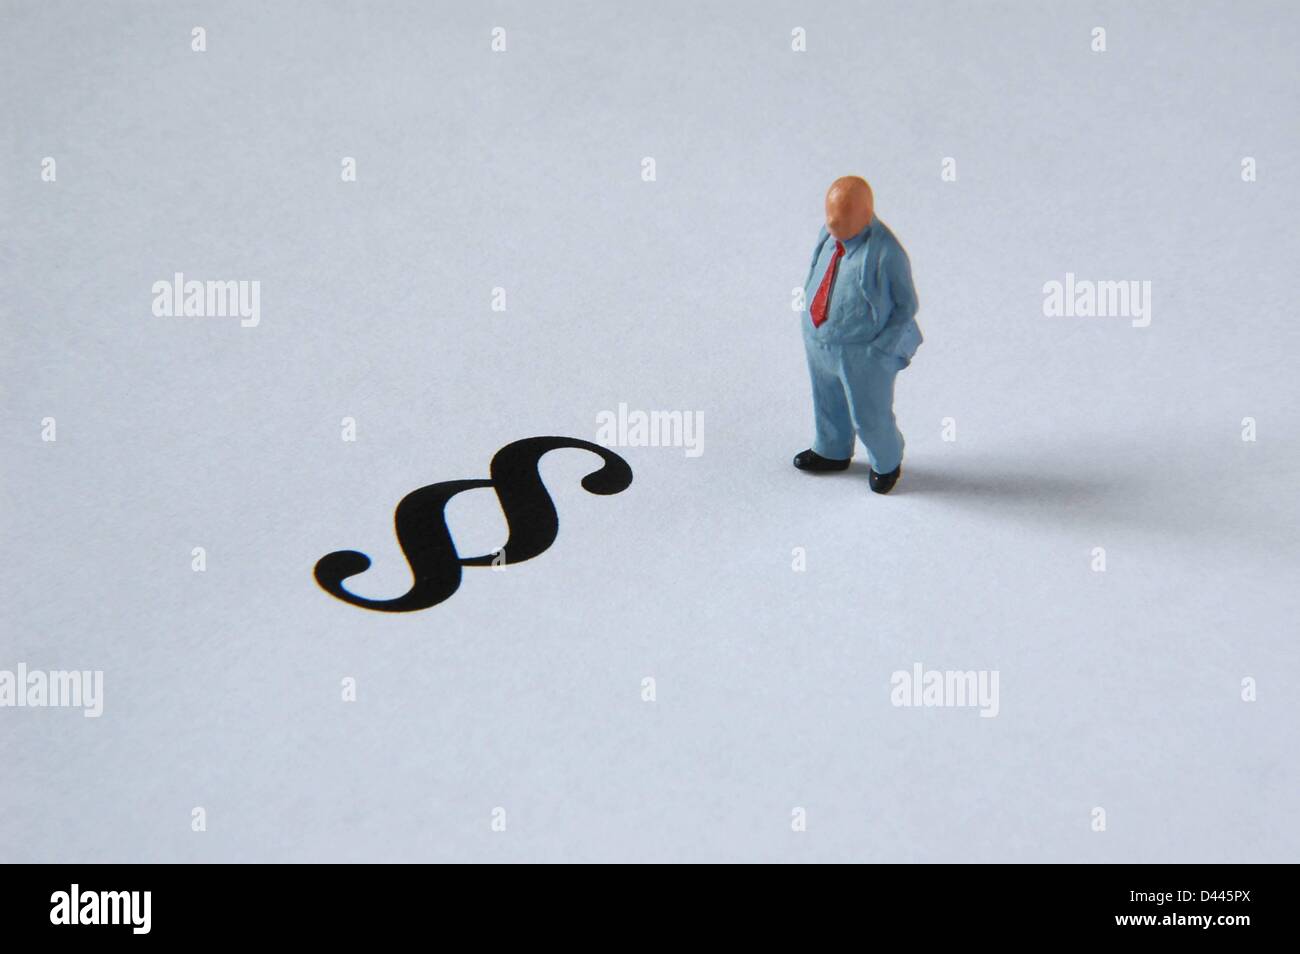 Illustration - A miniature figure in a suit stands next to the paragraph sign in Berlin, Germany, 5 December 2007. Fotoarchiv für ZeitgeschichteS.Steinach Stock Photo